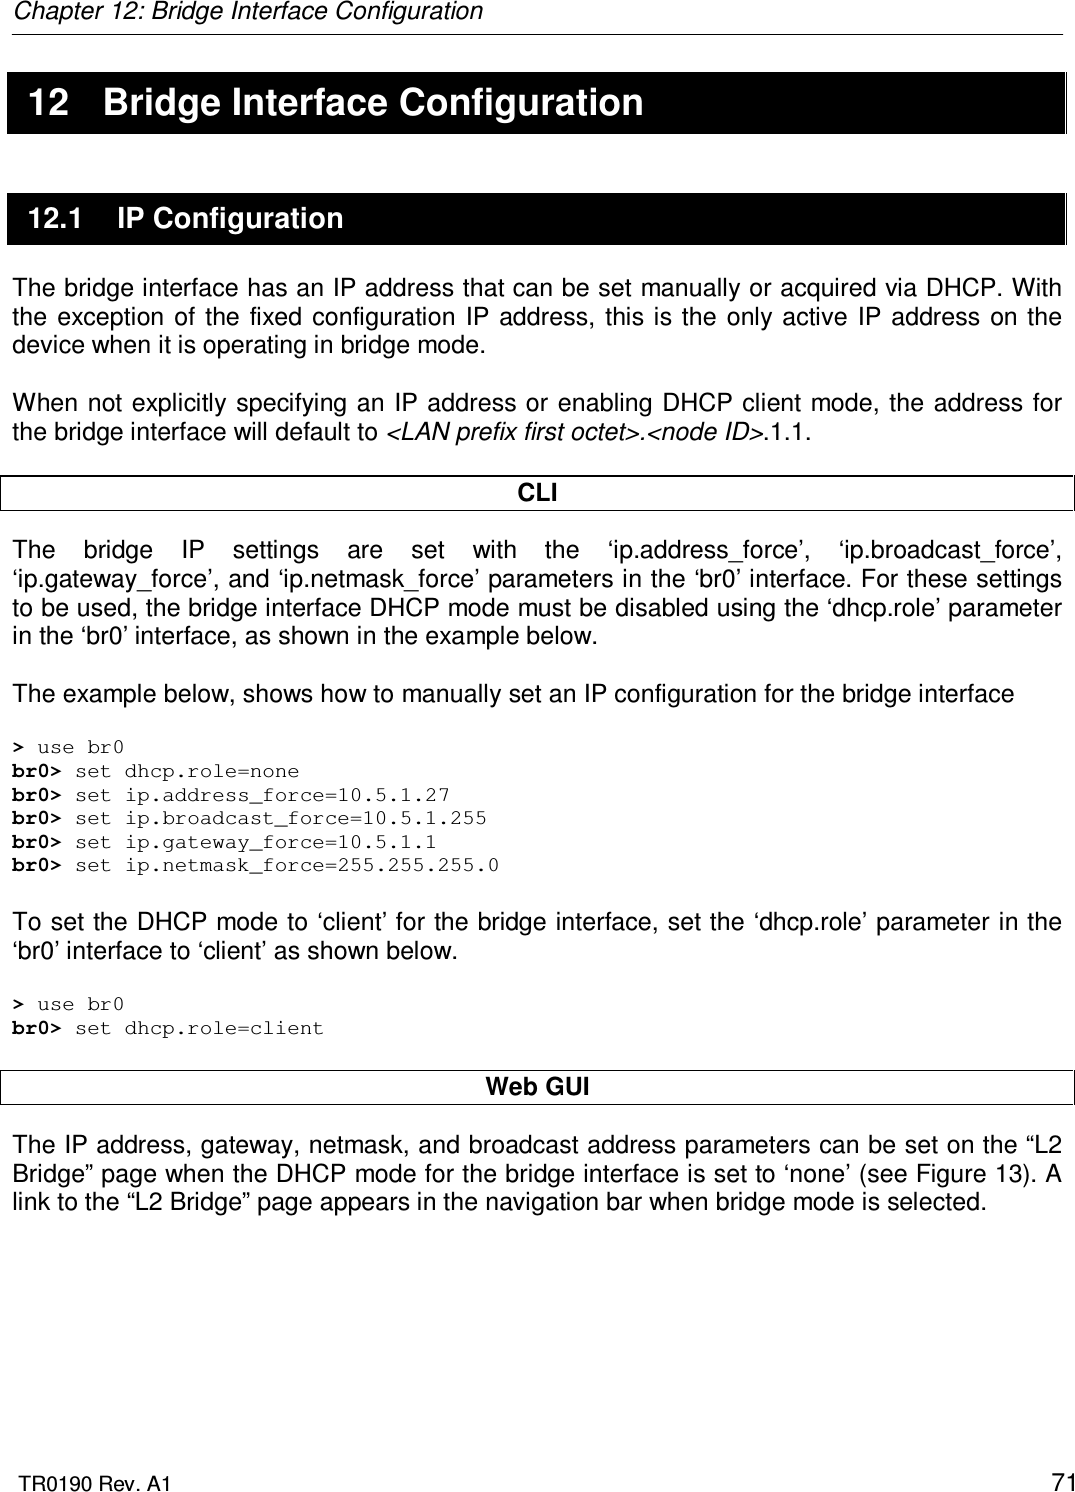 Chapter 12: Bridge Interface Configuration  TR0190 Rev. A1    71 12  Bridge Interface Configuration 12.1  IP Configuration The bridge interface has an IP address that can be set manually or acquired via DHCP. With the  exception of  the fixed  configuration  IP  address,  this  is  the  only active  IP  address  on  the device when it is operating in bridge mode.  When not explicitly specifying an IP address  or enabling DHCP client mode, the  address for the bridge interface will default to &lt;LAN prefix first octet&gt;.&lt;node ID&gt;.1.1.  CLI The  bridge  IP  settings  are  set  with  the  ‘ip.address_force’,  ‘ip.broadcast_force’, ‘ip.gateway_force’, and ‘ip.netmask_force’ parameters in the ‘br0’ interface. For these settings to be used, the bridge interface DHCP mode must be disabled using the ‘dhcp.role’ parameter in the ‘br0’ interface, as shown in the example below.  The example below, shows how to manually set an IP configuration for the bridge interface  &gt; use br0 br0&gt; set dhcp.role=none br0&gt; set ip.address_force=10.5.1.27 br0&gt; set ip.broadcast_force=10.5.1.255 br0&gt; set ip.gateway_force=10.5.1.1 br0&gt; set ip.netmask_force=255.255.255.0  To set the DHCP mode to ‘client’ for the bridge interface, set the ‘dhcp.role’ parameter in the ‘br0’ interface to ‘client’ as shown below.  &gt; use br0 br0&gt; set dhcp.role=client  Web GUI The IP address, gateway, netmask, and broadcast address parameters can be set on the “L2 Bridge” page when the DHCP mode for the bridge interface is set to ‘none’ (see Figure 13). A link to the “L2 Bridge” page appears in the navigation bar when bridge mode is selected.  